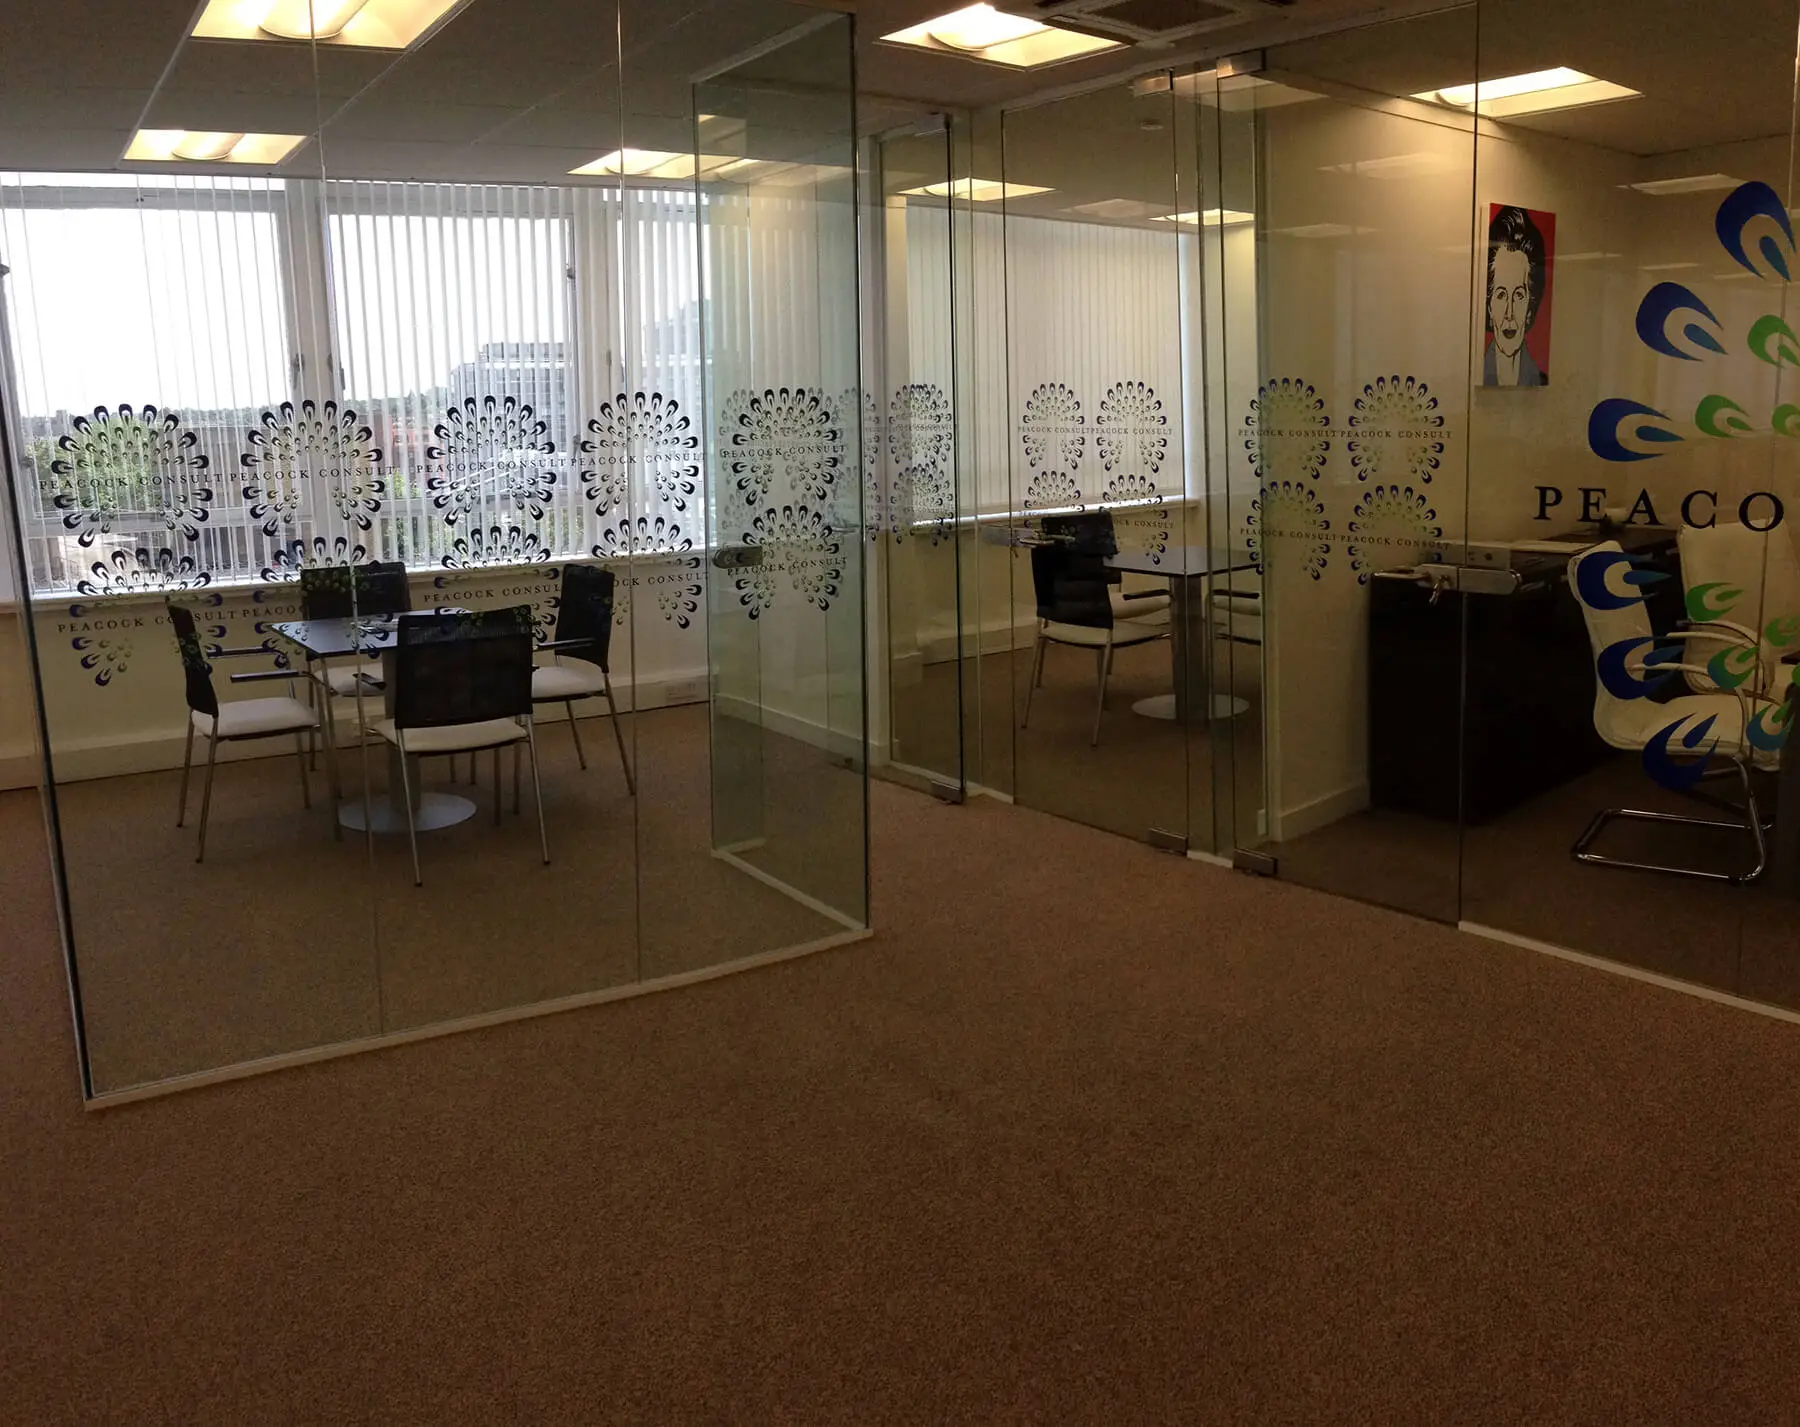 Meeting spaces partitioned with designer glass